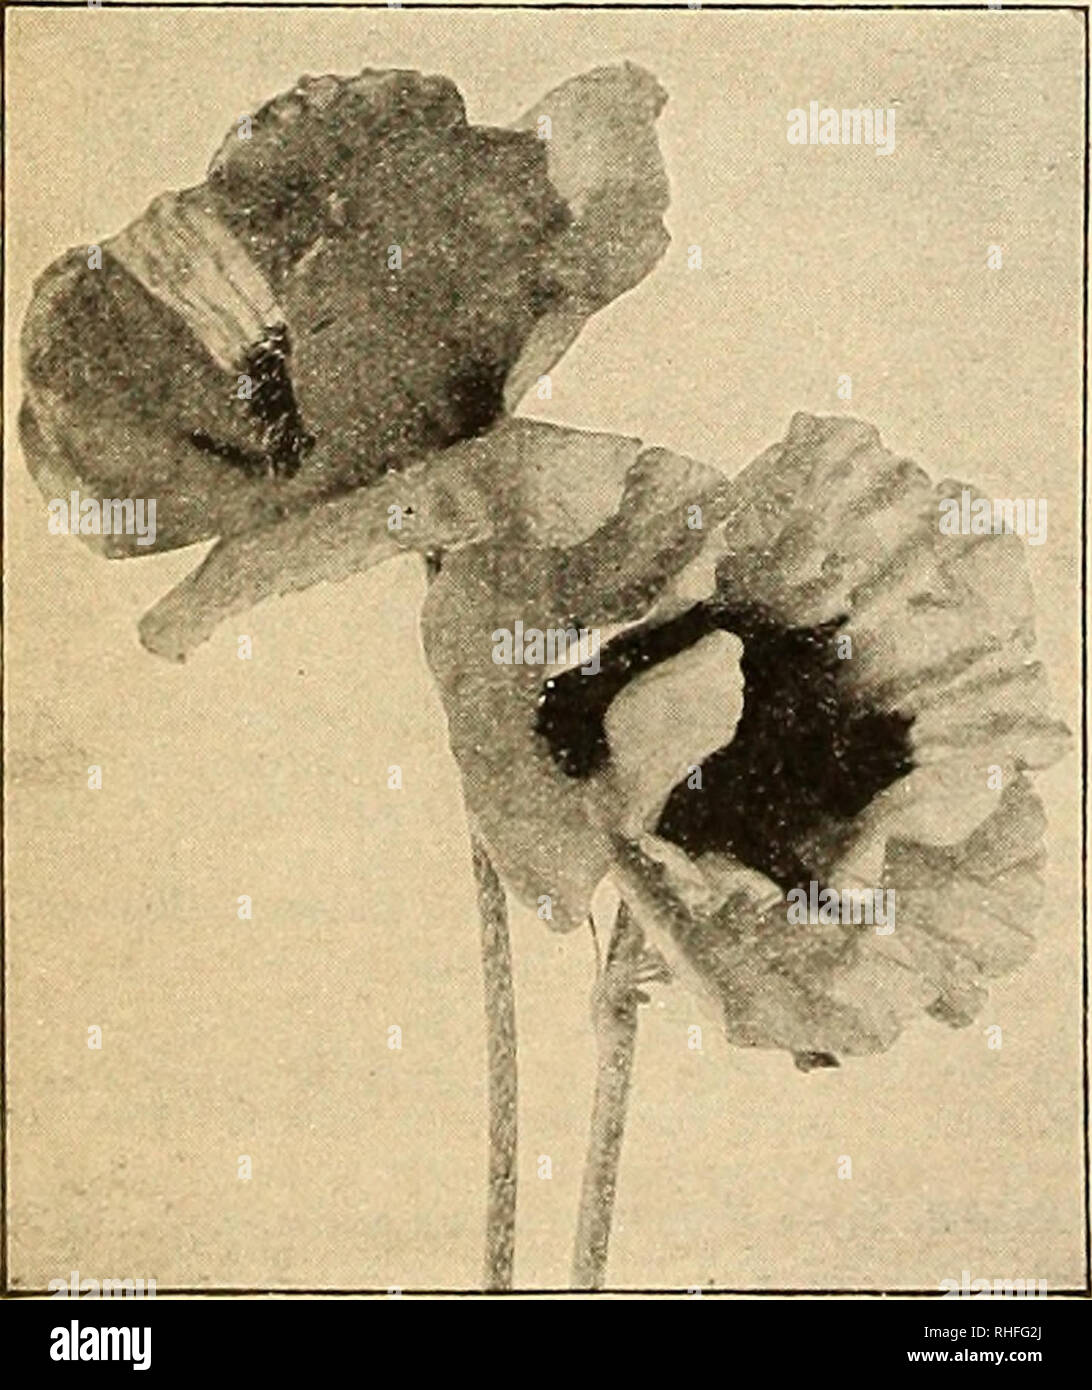 . Bolgiano's capitol city seeds : 1935. Nurseries (Horticulture) Catalogs; Bulbs (Plants) Catalogs; Vegetables Catalogs; Garden tools Catalogs; Seeds Catalogs; Flowers Catalogs; Poultry Equipment and supplies Catalogs. Phlox Drummondi 841. SWEET BRIER A.—The New Double Shirley Poppy. (See illustration in color back outside cover.) One of the most popular shades in shirley poppies has been wild rose pink. We now offer this most beautiful color in a double flowering form. The blossoms are full double resembling a very large double begonia. Pkt. 15 cts.; Vi oz. 40 cts.; oz. $1.00. PERENNIAL POPPI Stock Photo